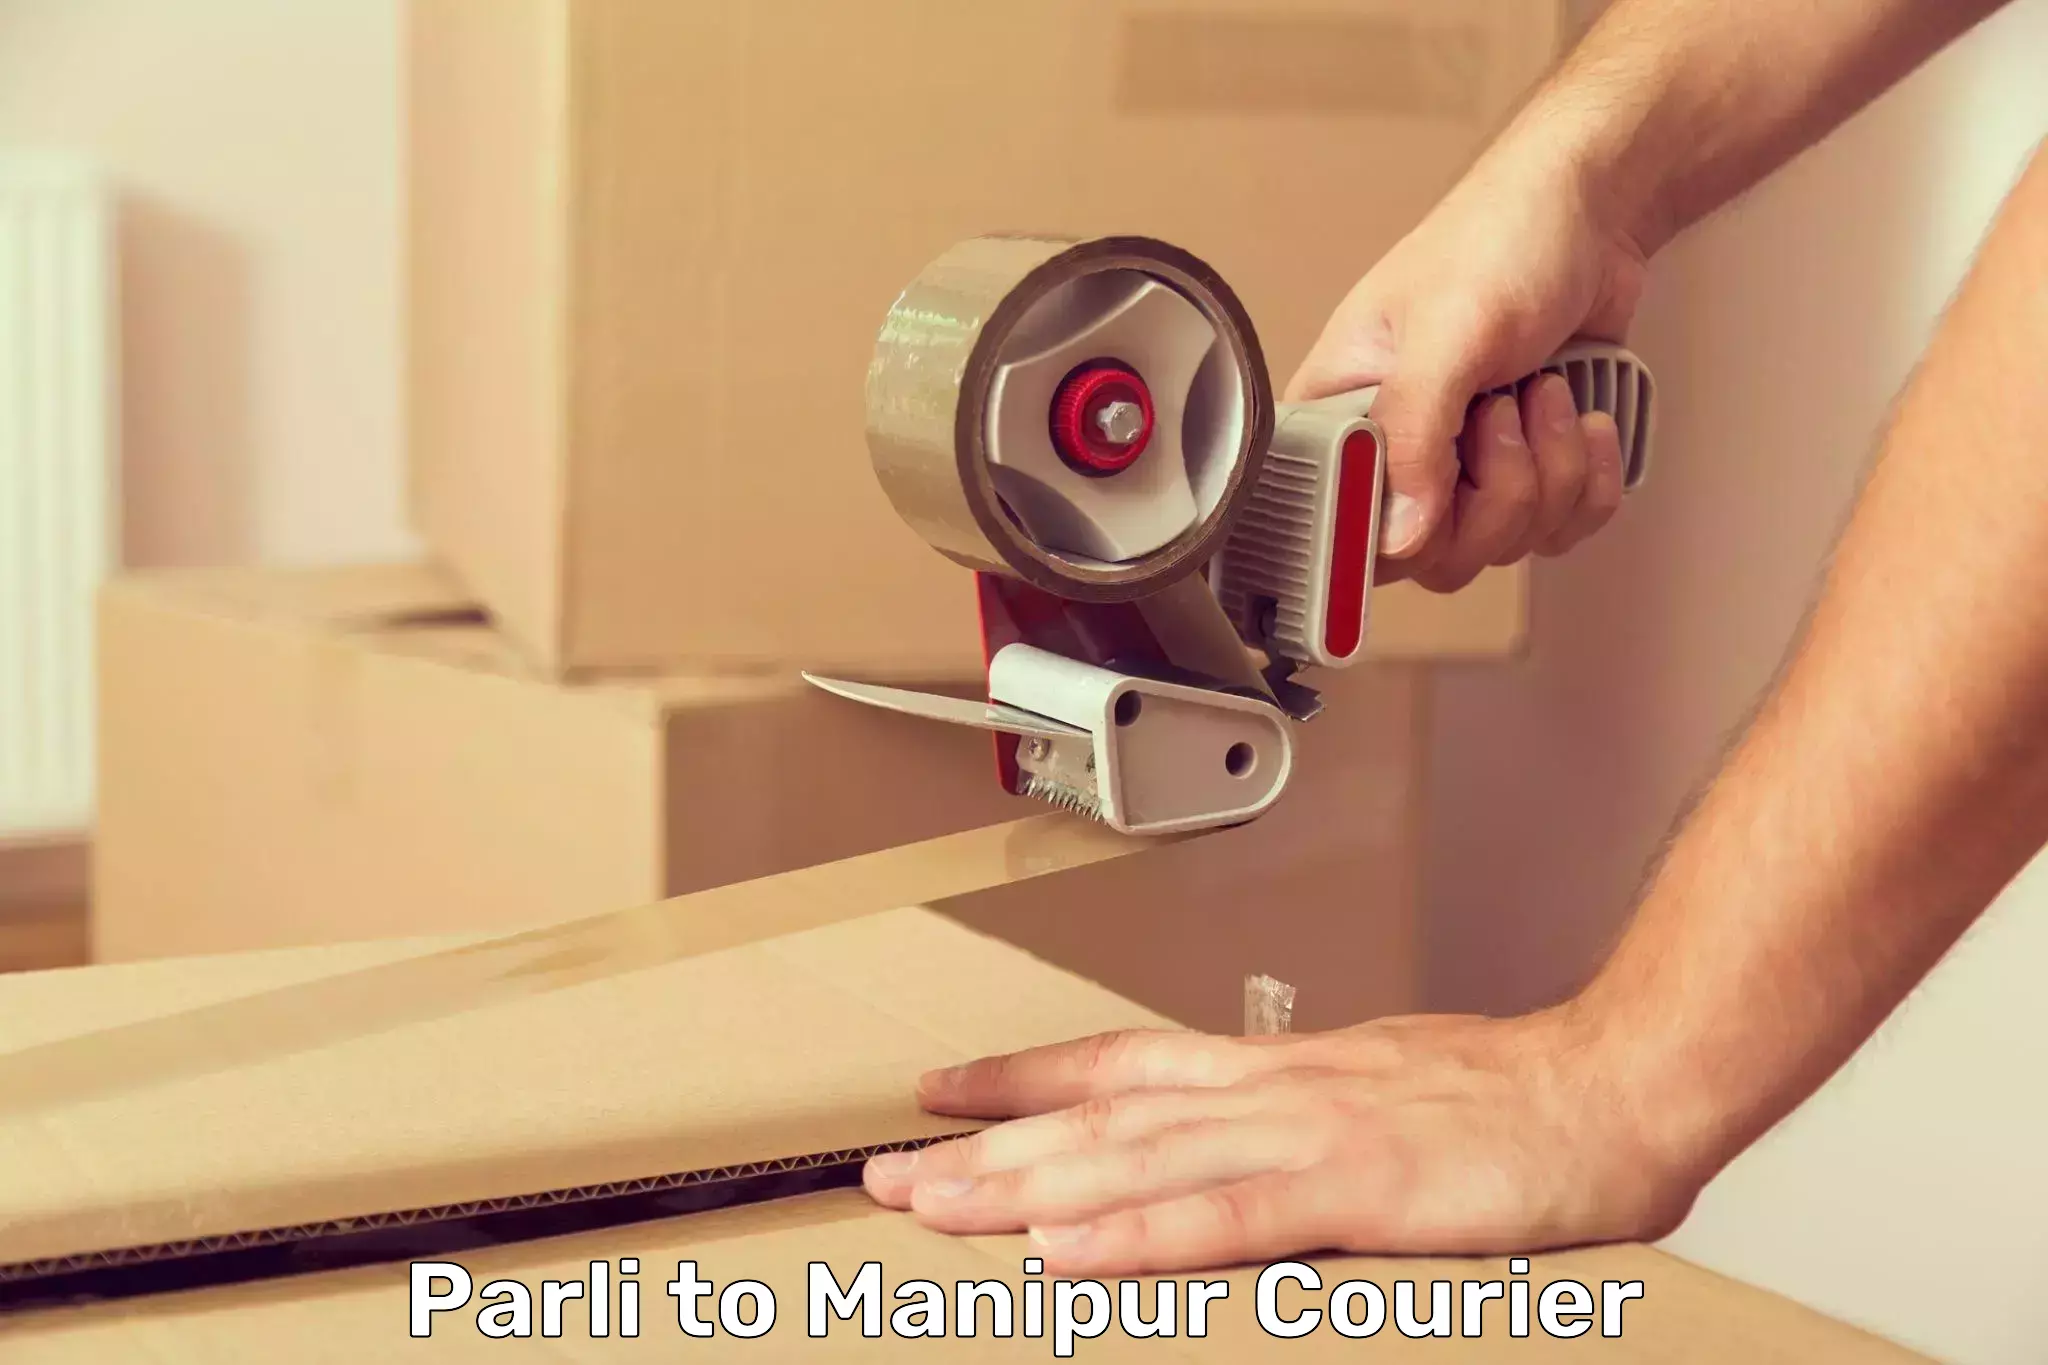 International courier networks Parli to Manipur